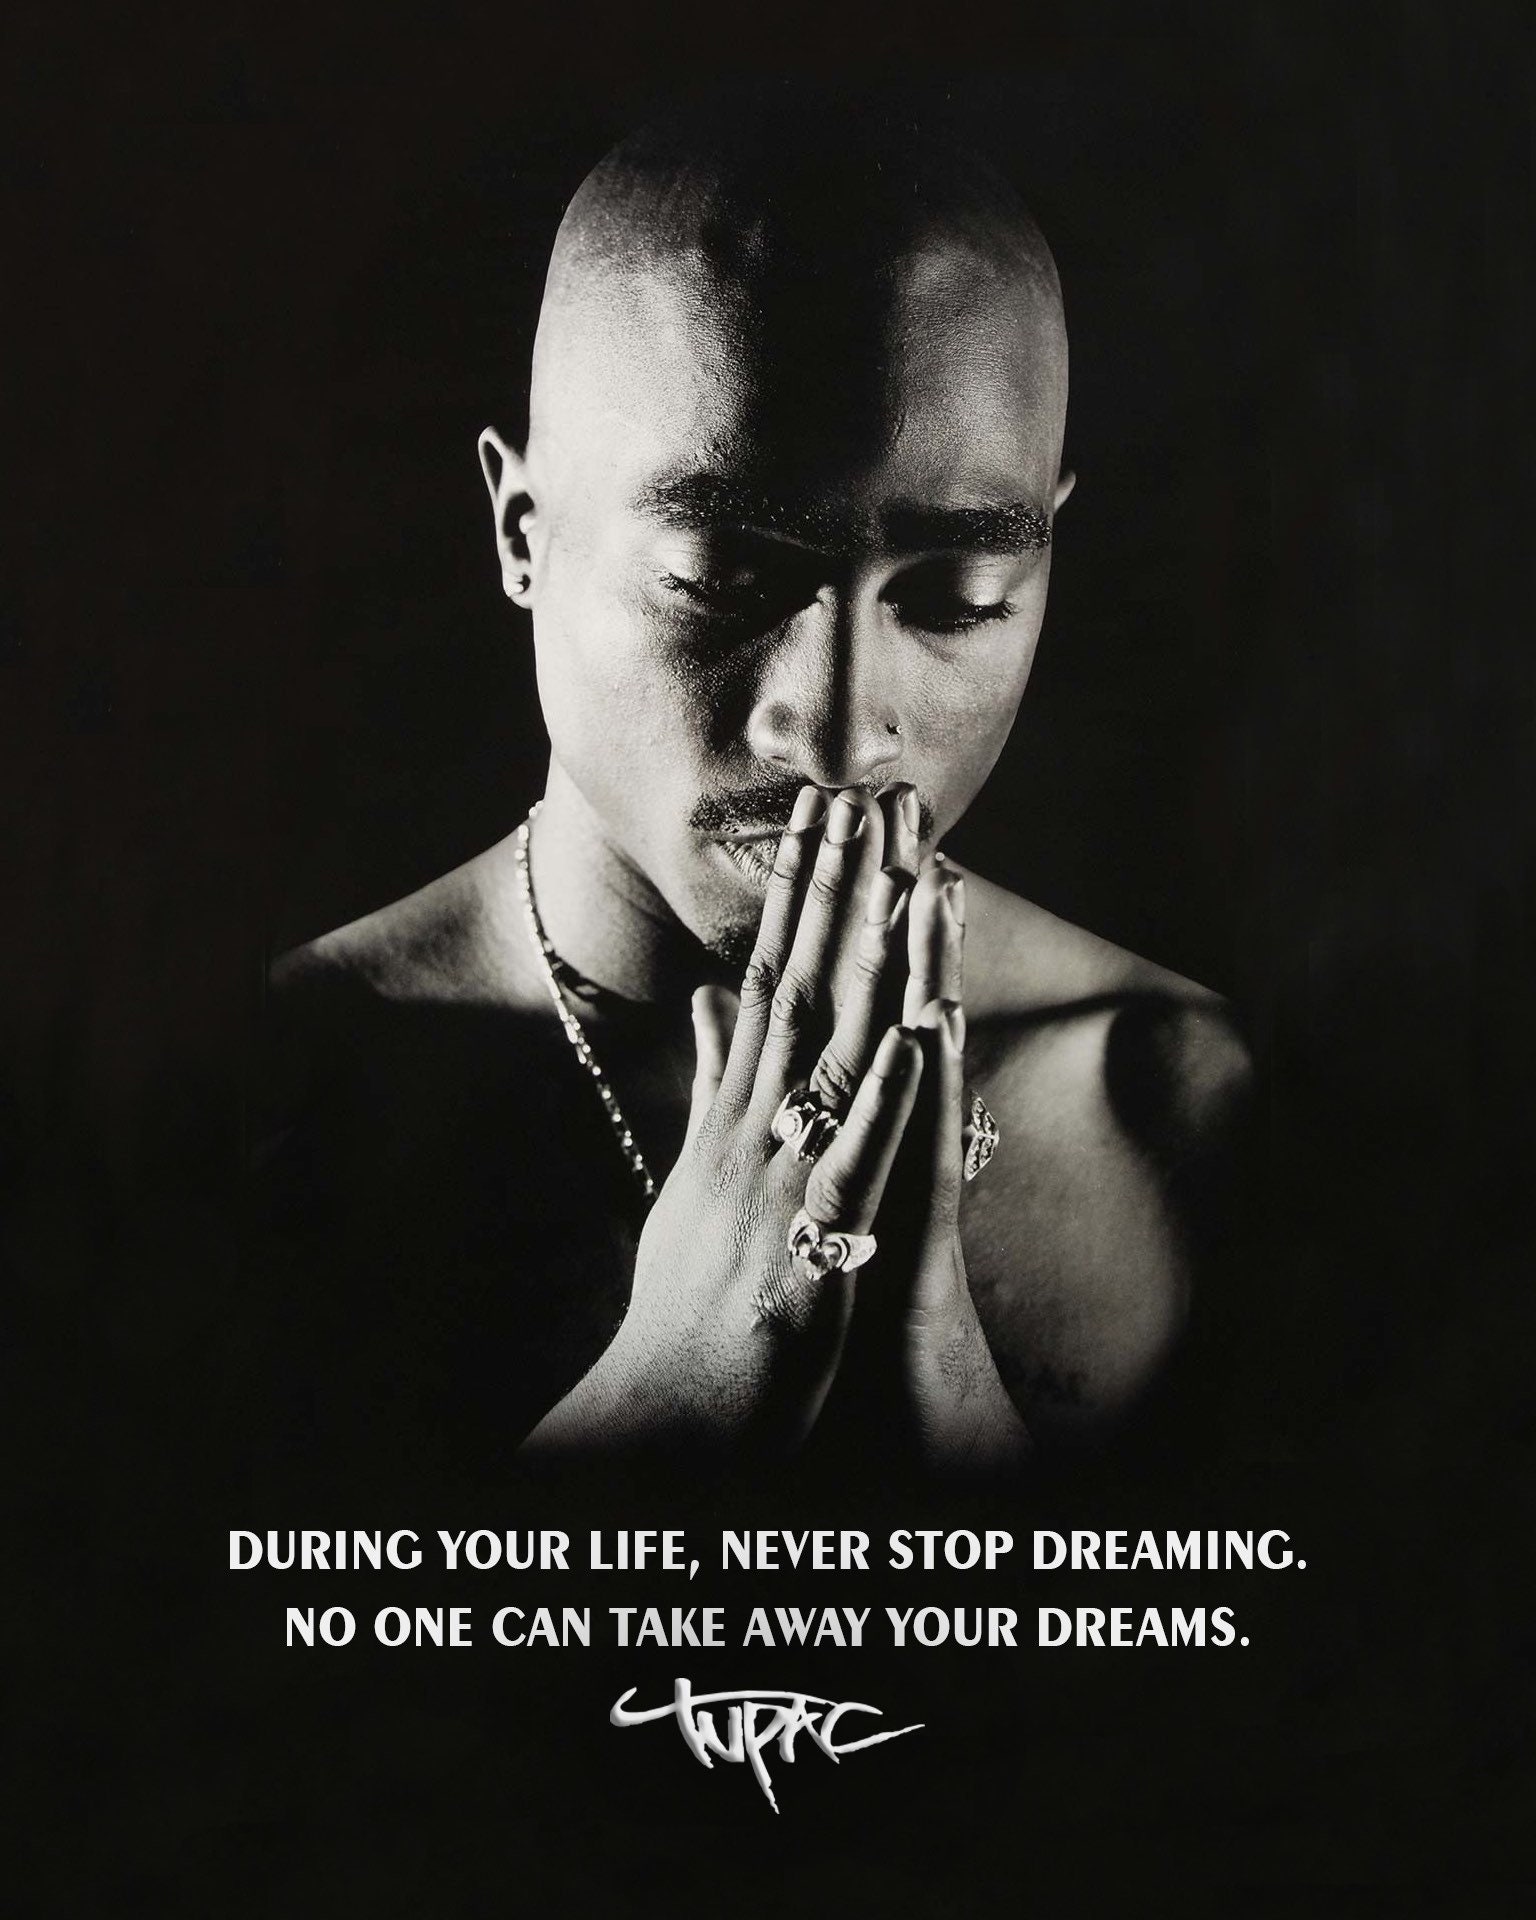 Pac Typography Poster Quote Poster Inspirational Quotes Music Series Pray For Better Days